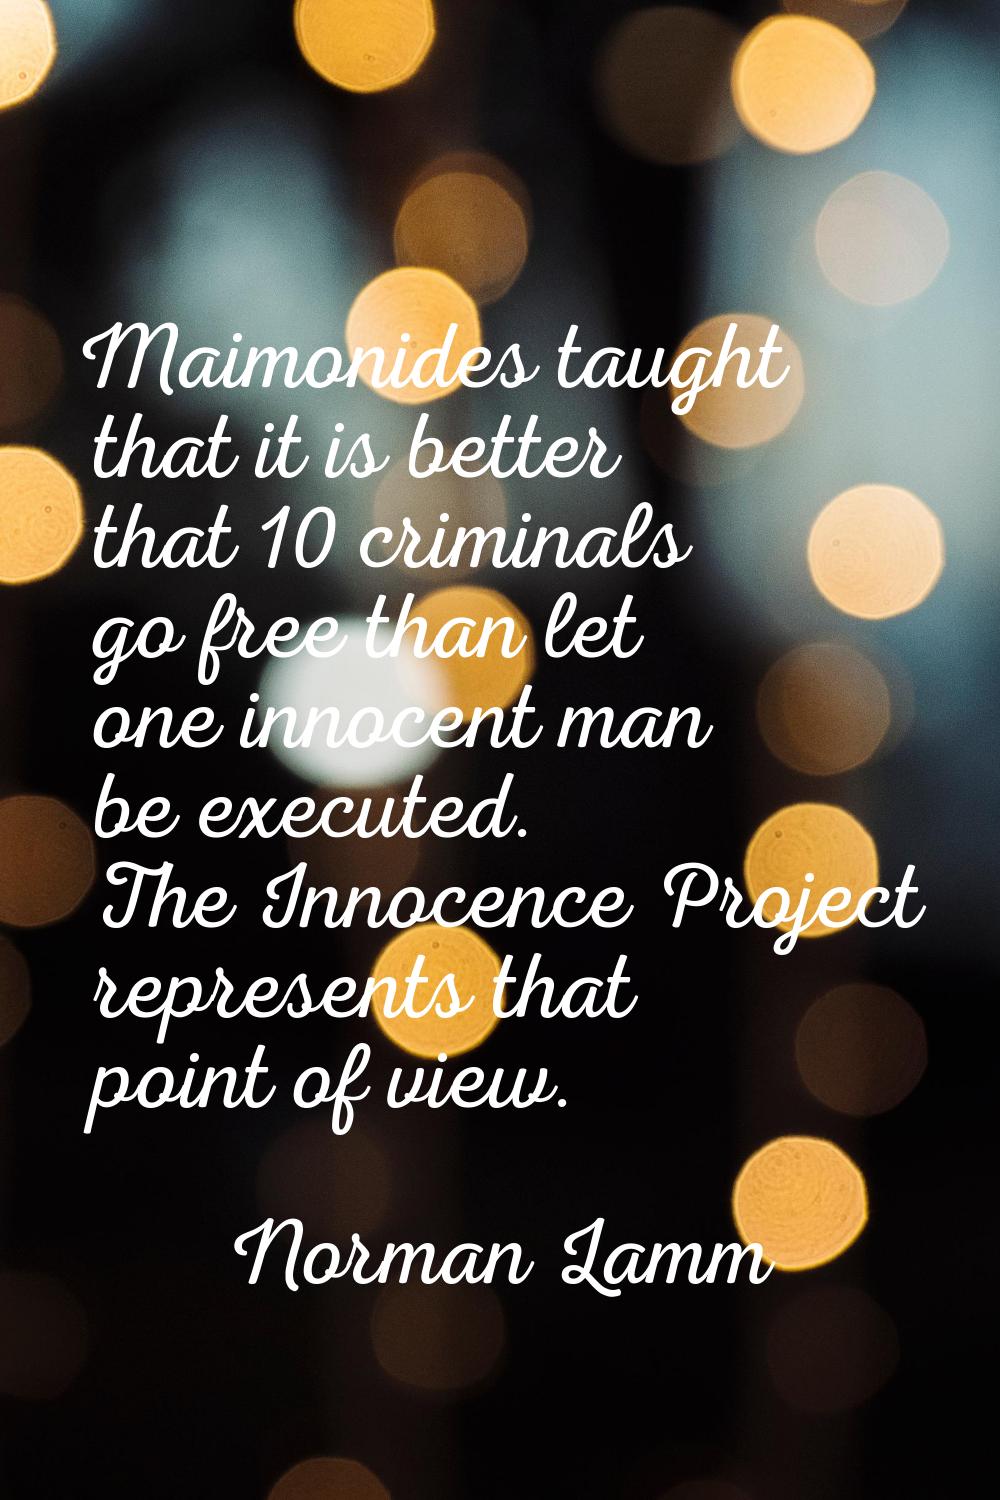 Maimonides taught that it is better that 10 criminals go free than let one innocent man be executed